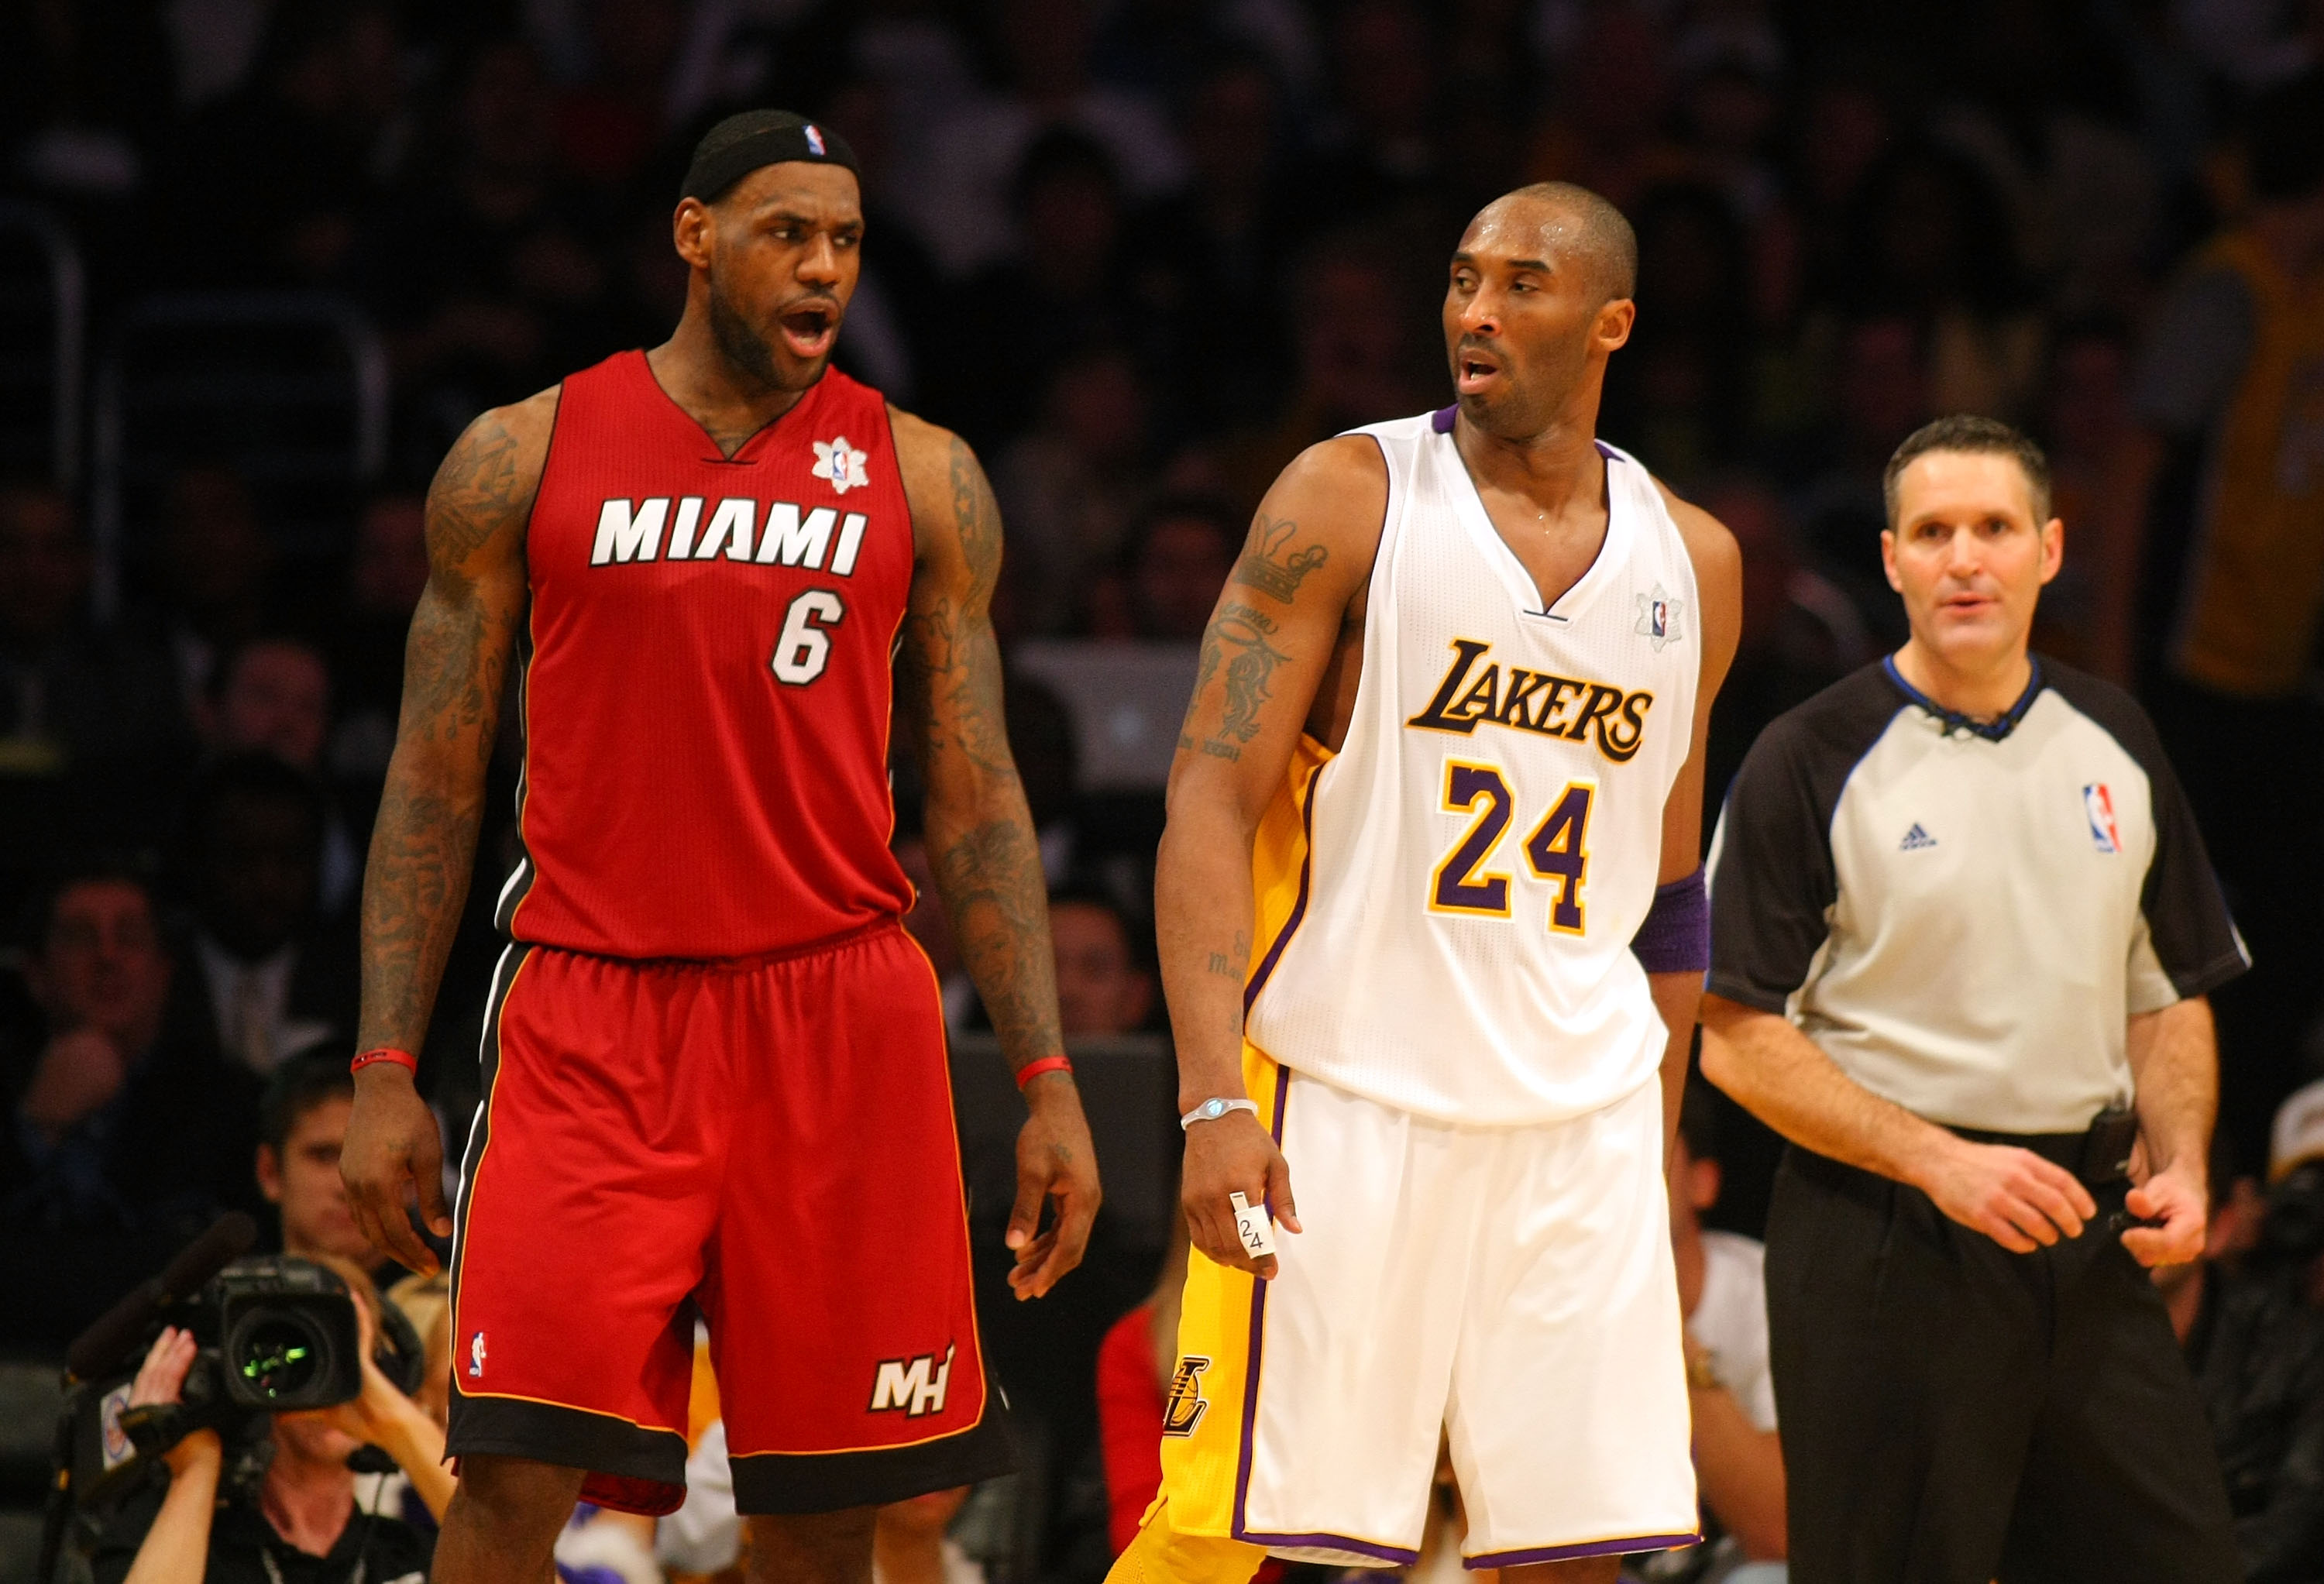 Nine years ago, the Lakers tried to trade Kobe Bryant for LeBron James 